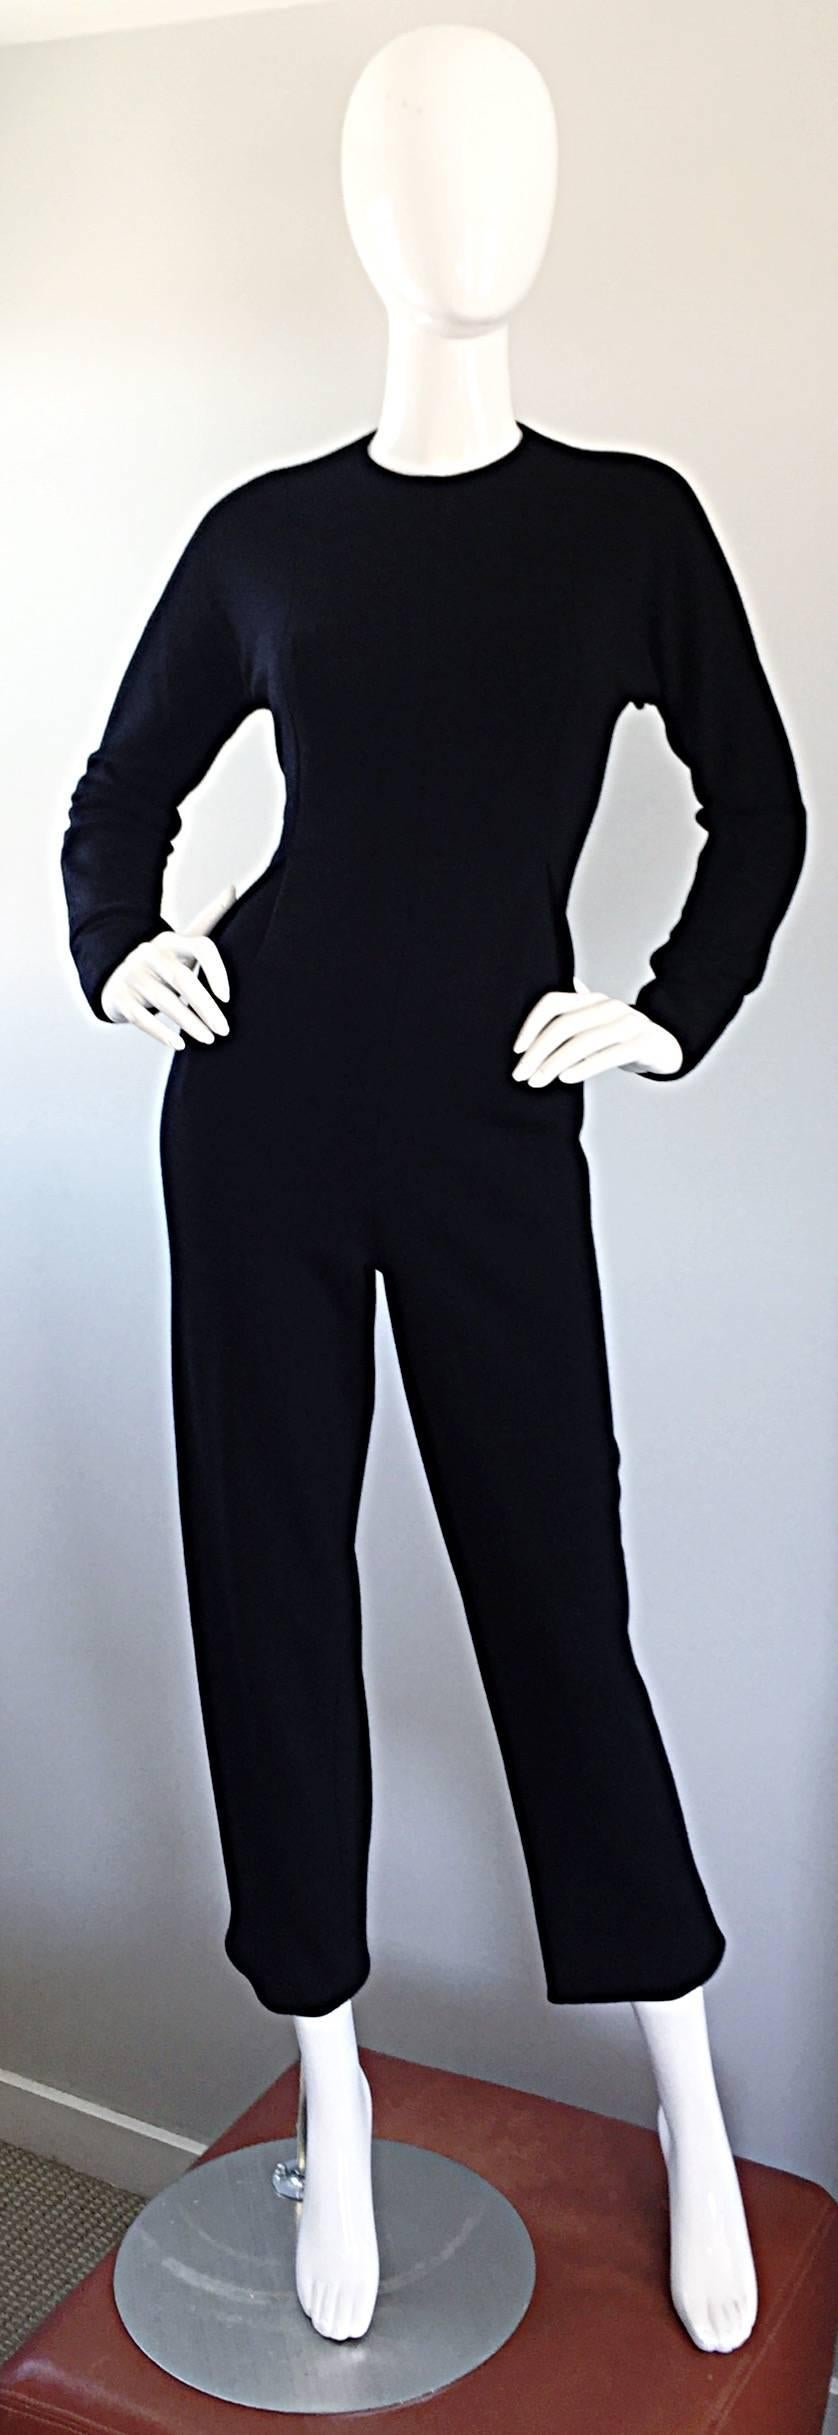 Chic vintage GEOFFREY BEENE for SAKS FIFTH AVE. black wool knit long sleeve jumpsuit / catsuit! Fitted bodice with long tailored sleeves. Super comfortable soft wool knit stretches to fit. The possibilities are endless with this classic gem. Hidden